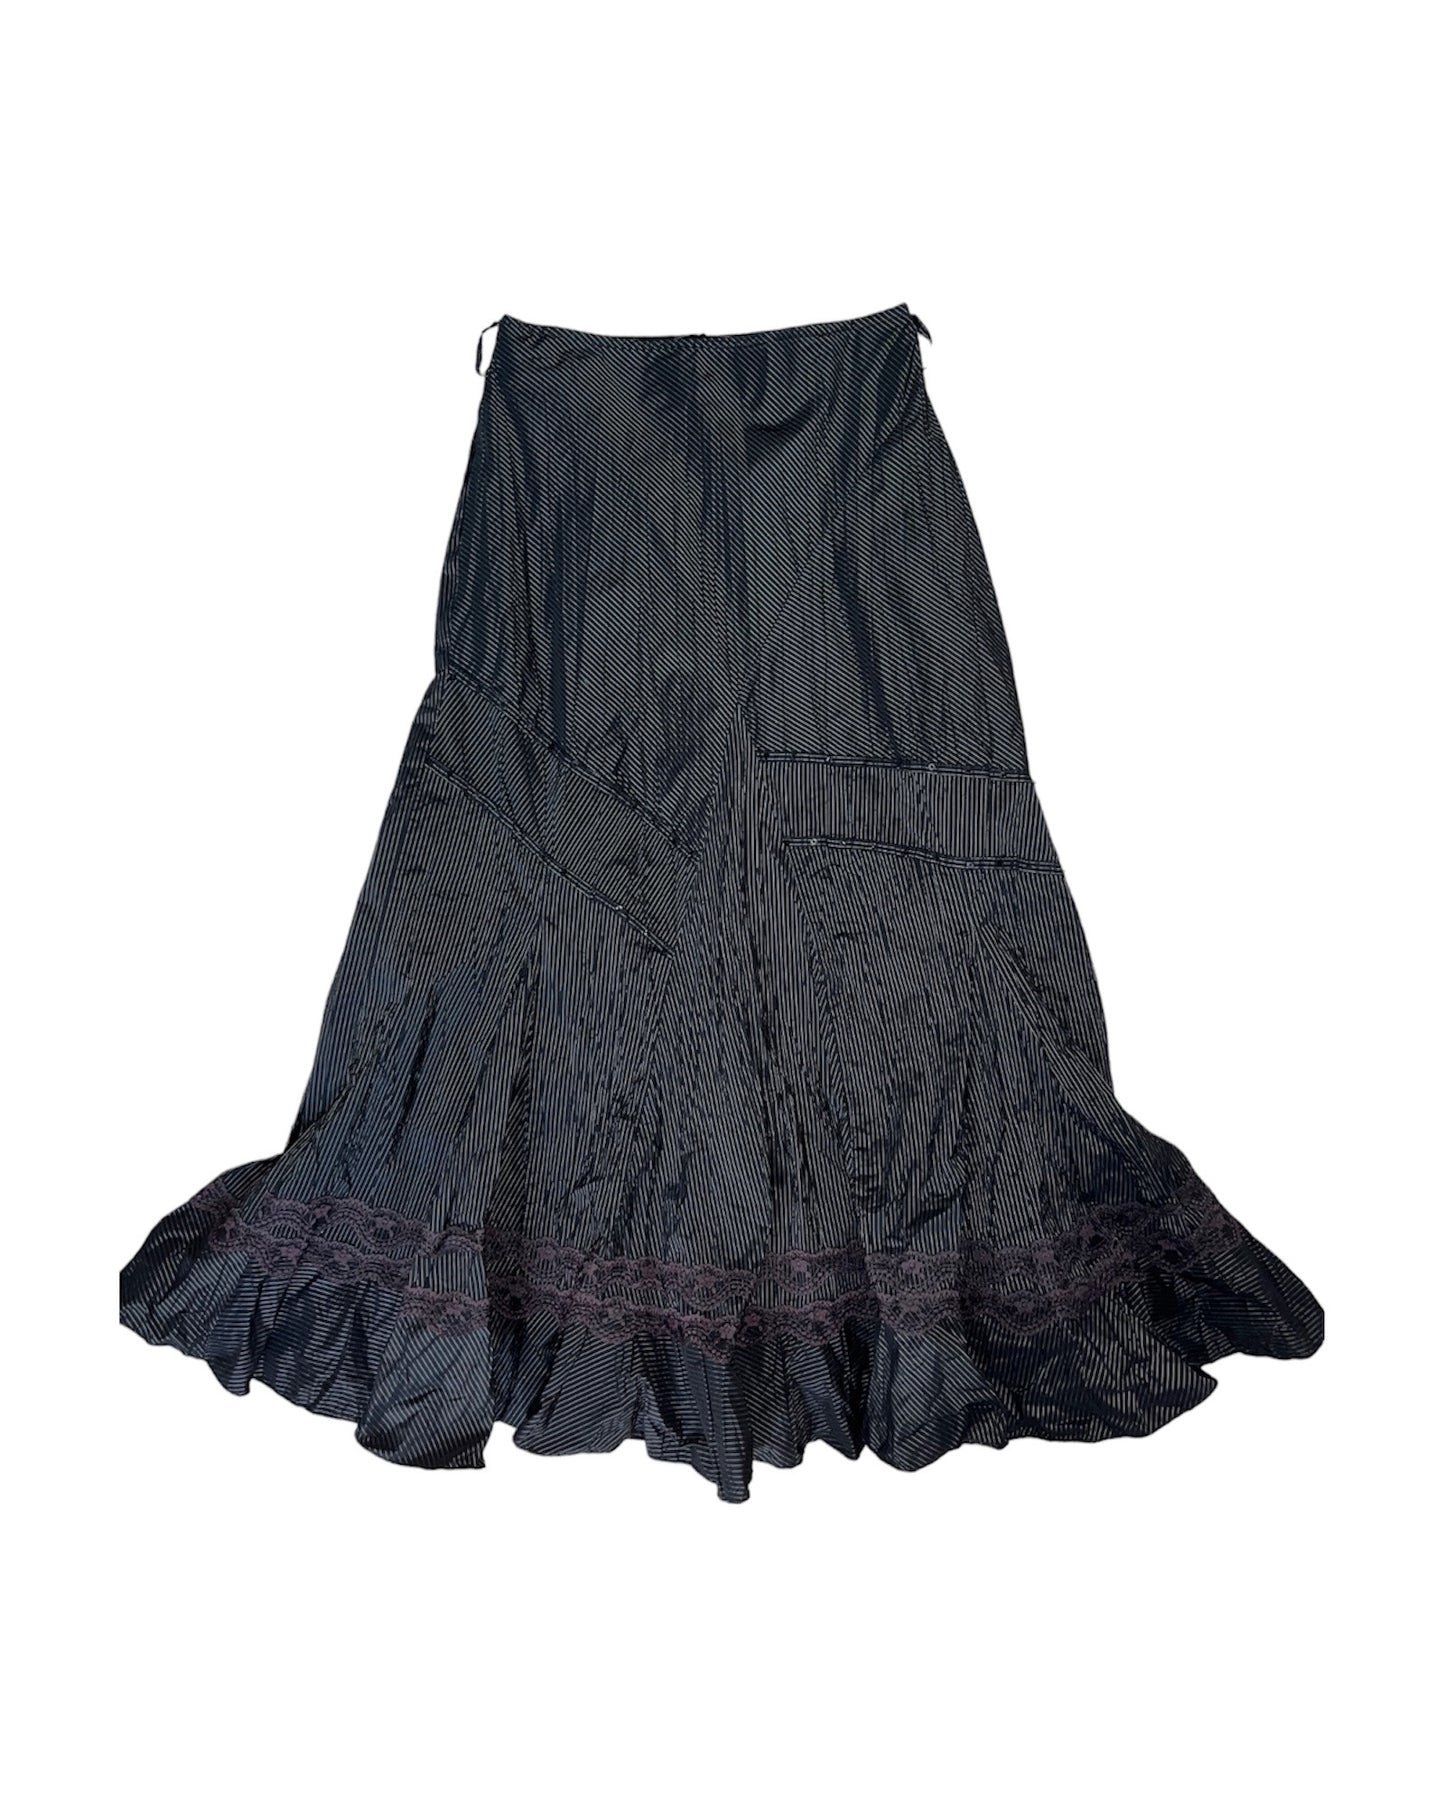 Le Mirage Gorpcore cargo pinstripe and lace teared skirt